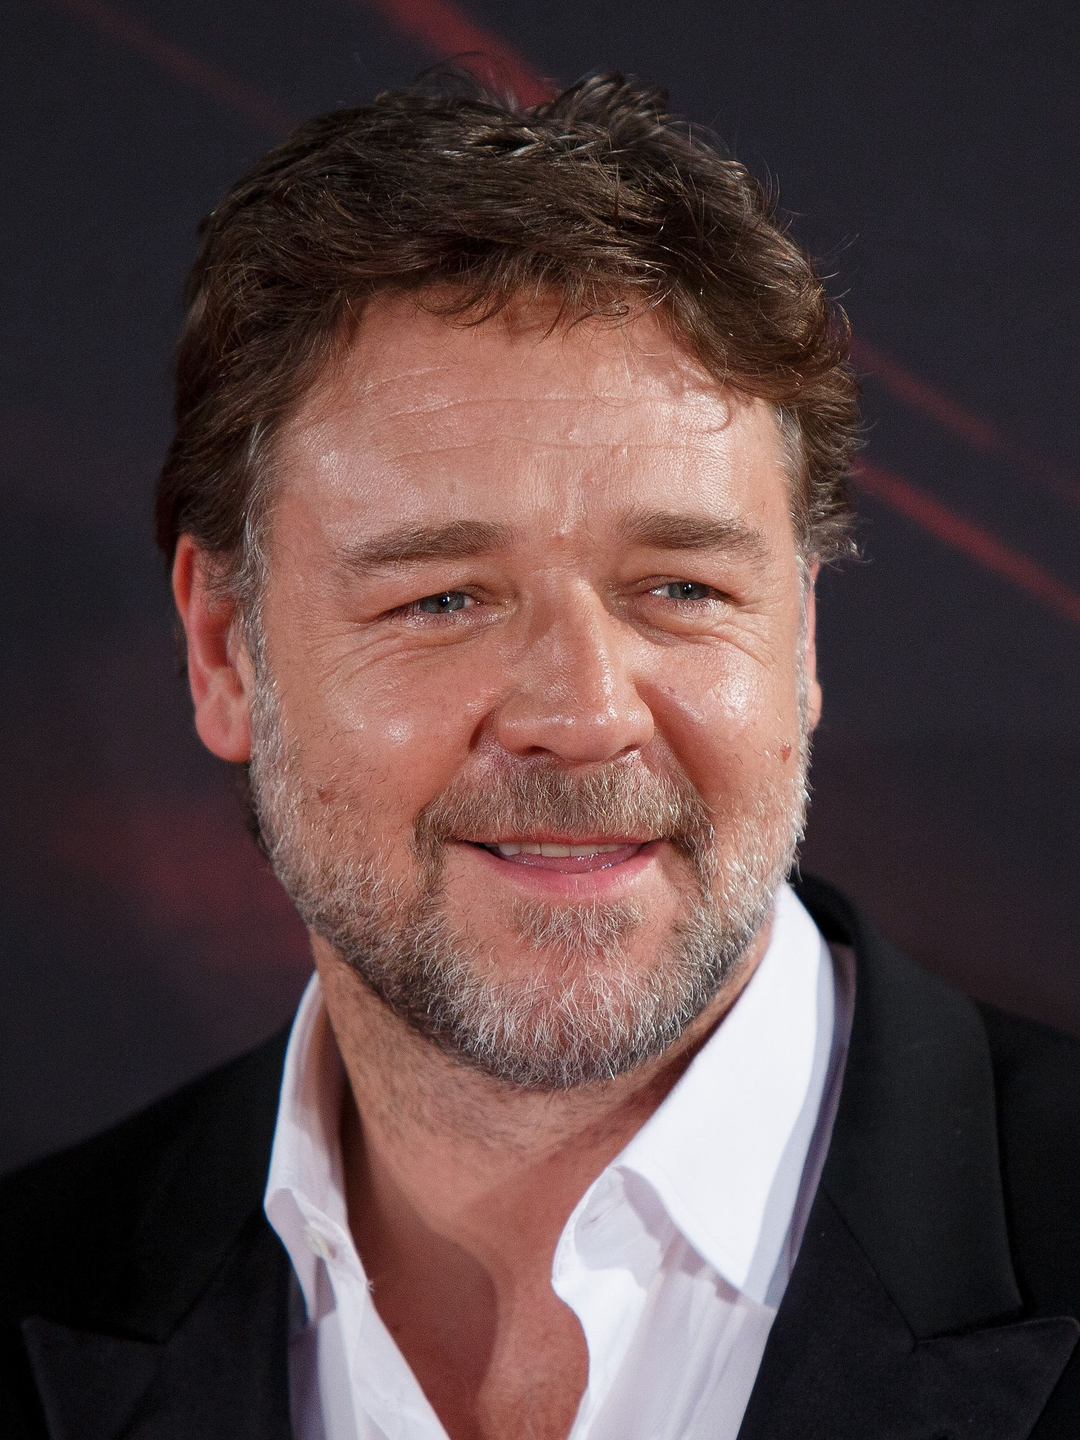 Russell Crowe in his youth